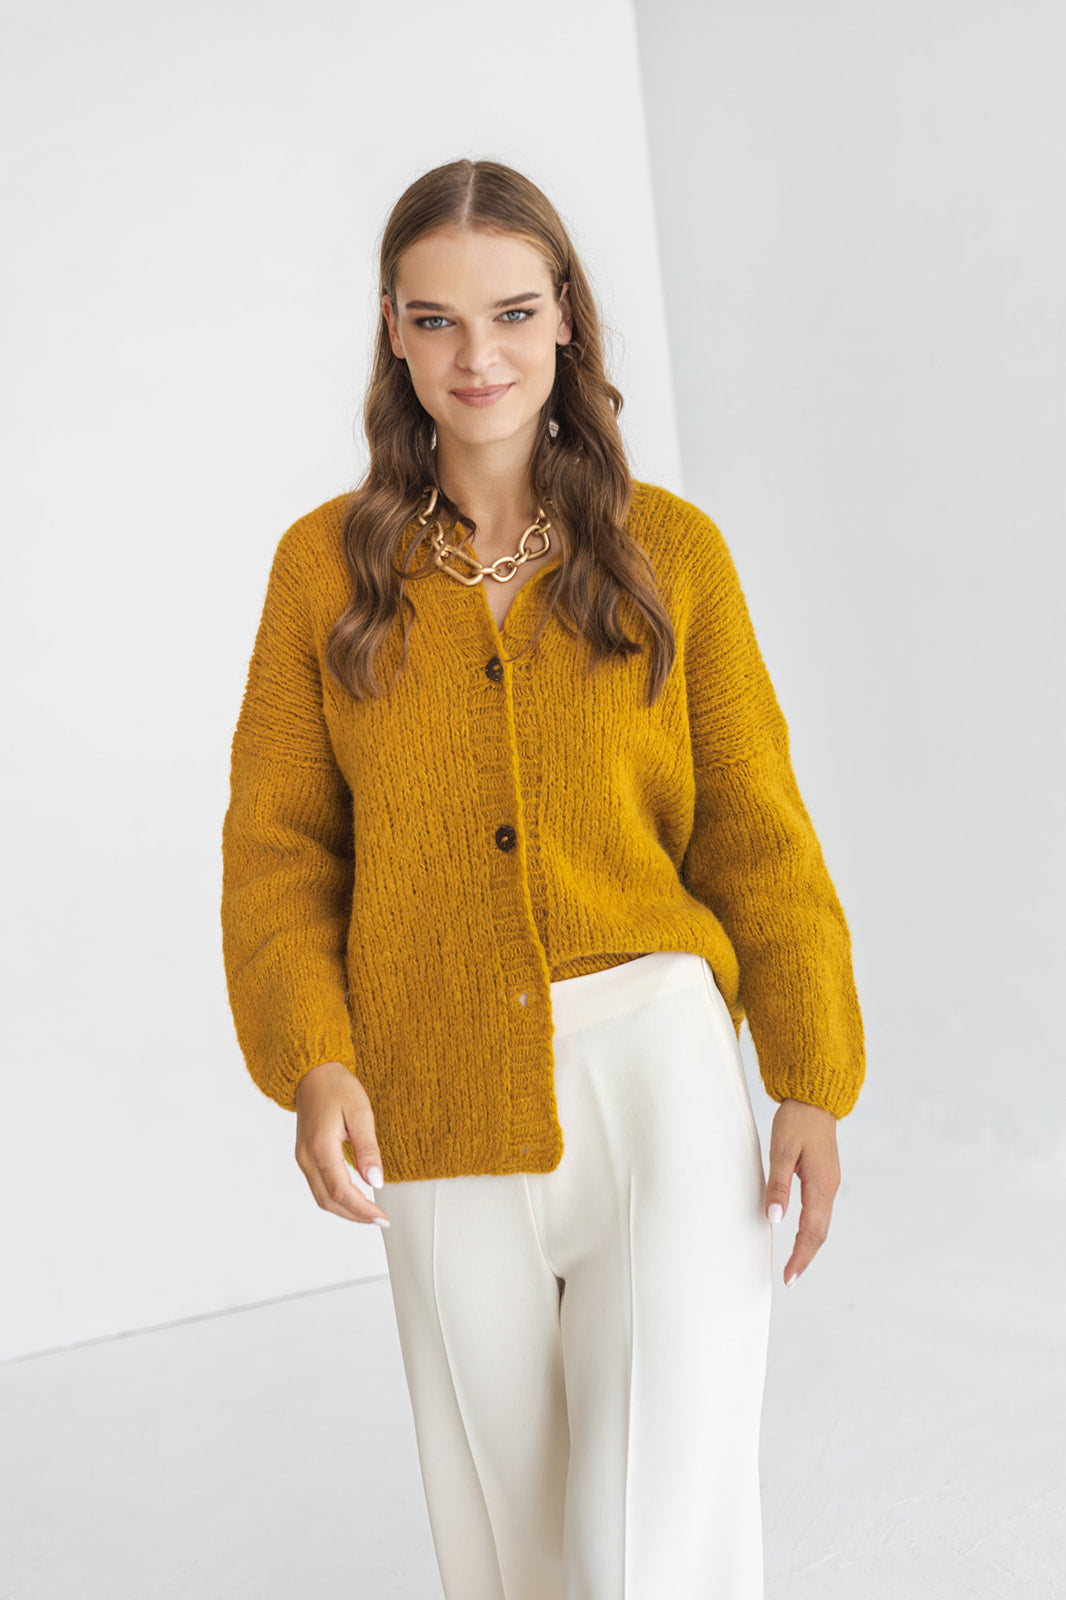 Mustard Yellow Alpaca Wool Cardigan With Buttons, Curry Cable Knit Lightweight Sweater, Slightly Oversized Minimalist Classy Women Gilet